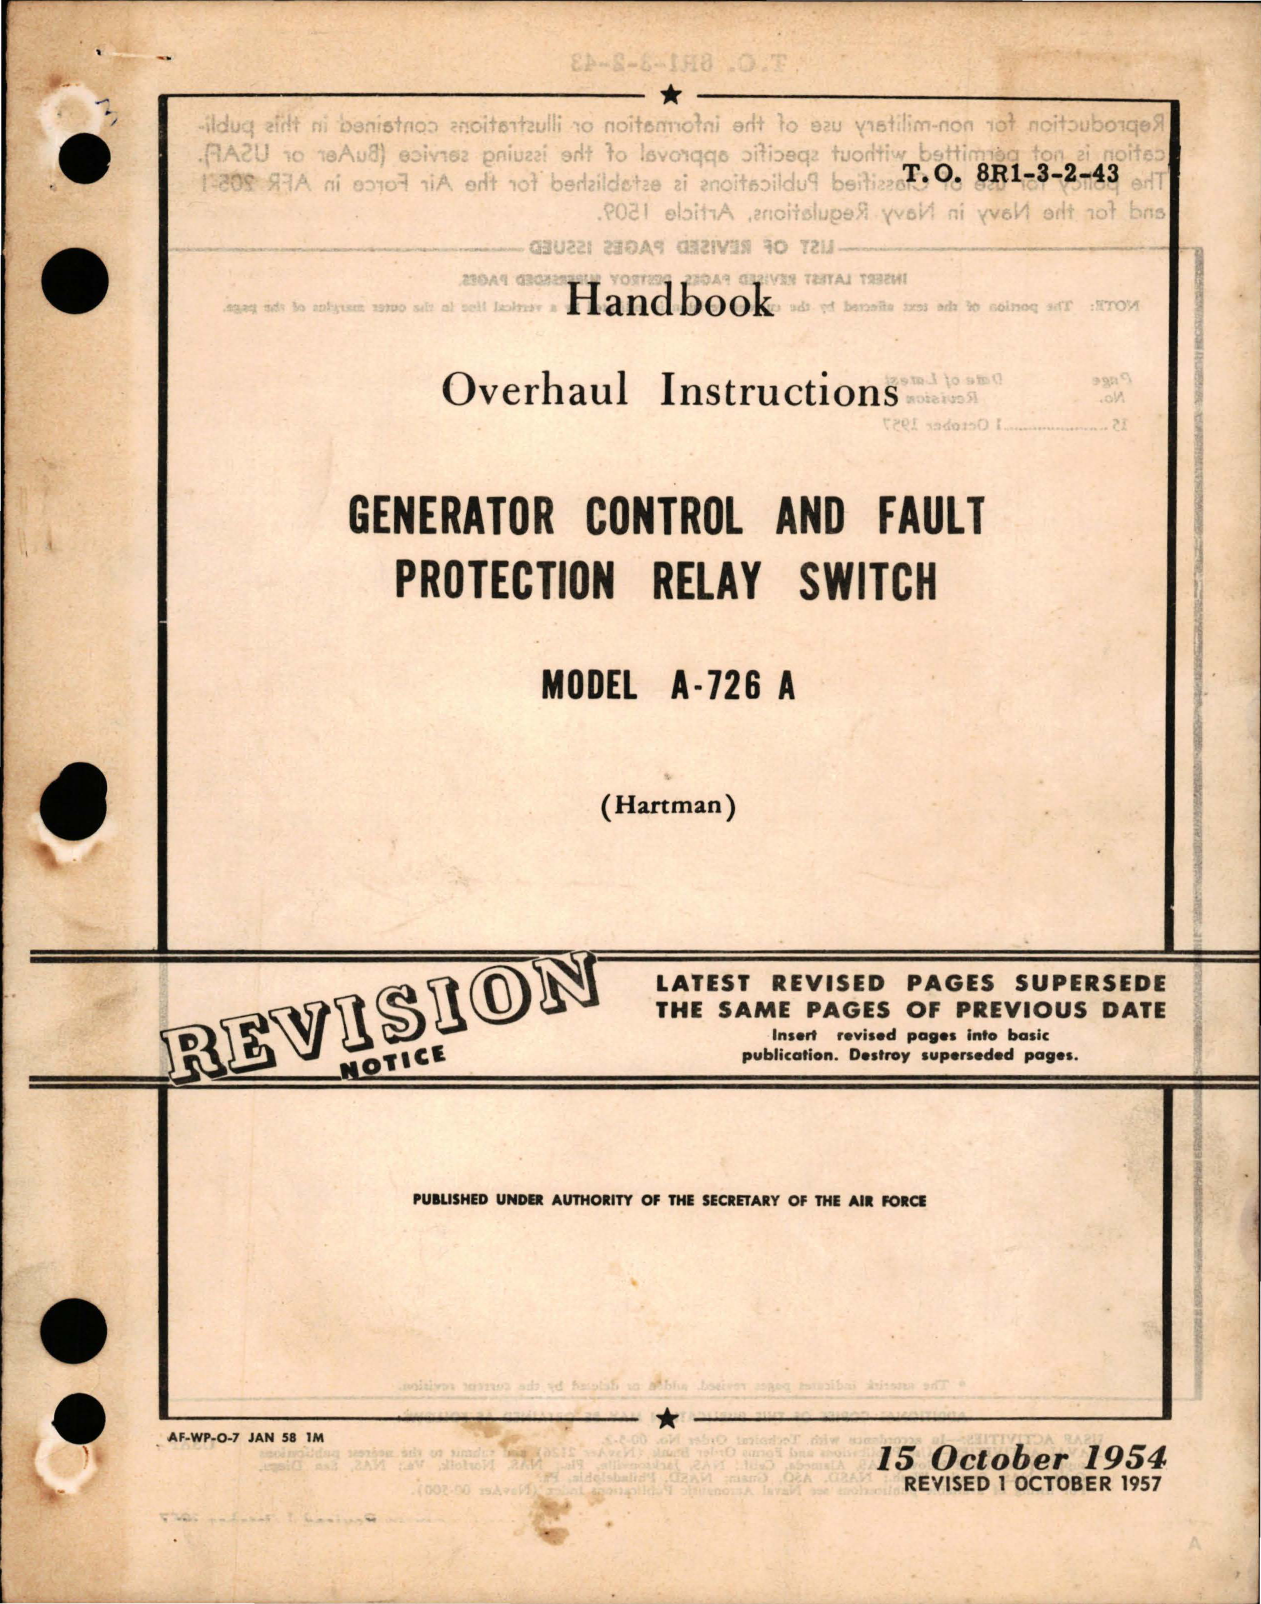 Sample page 1 from AirCorps Library document: Overhaul Instructions for Generator Control and Fault Protection Relay Switch - Model A-726 A